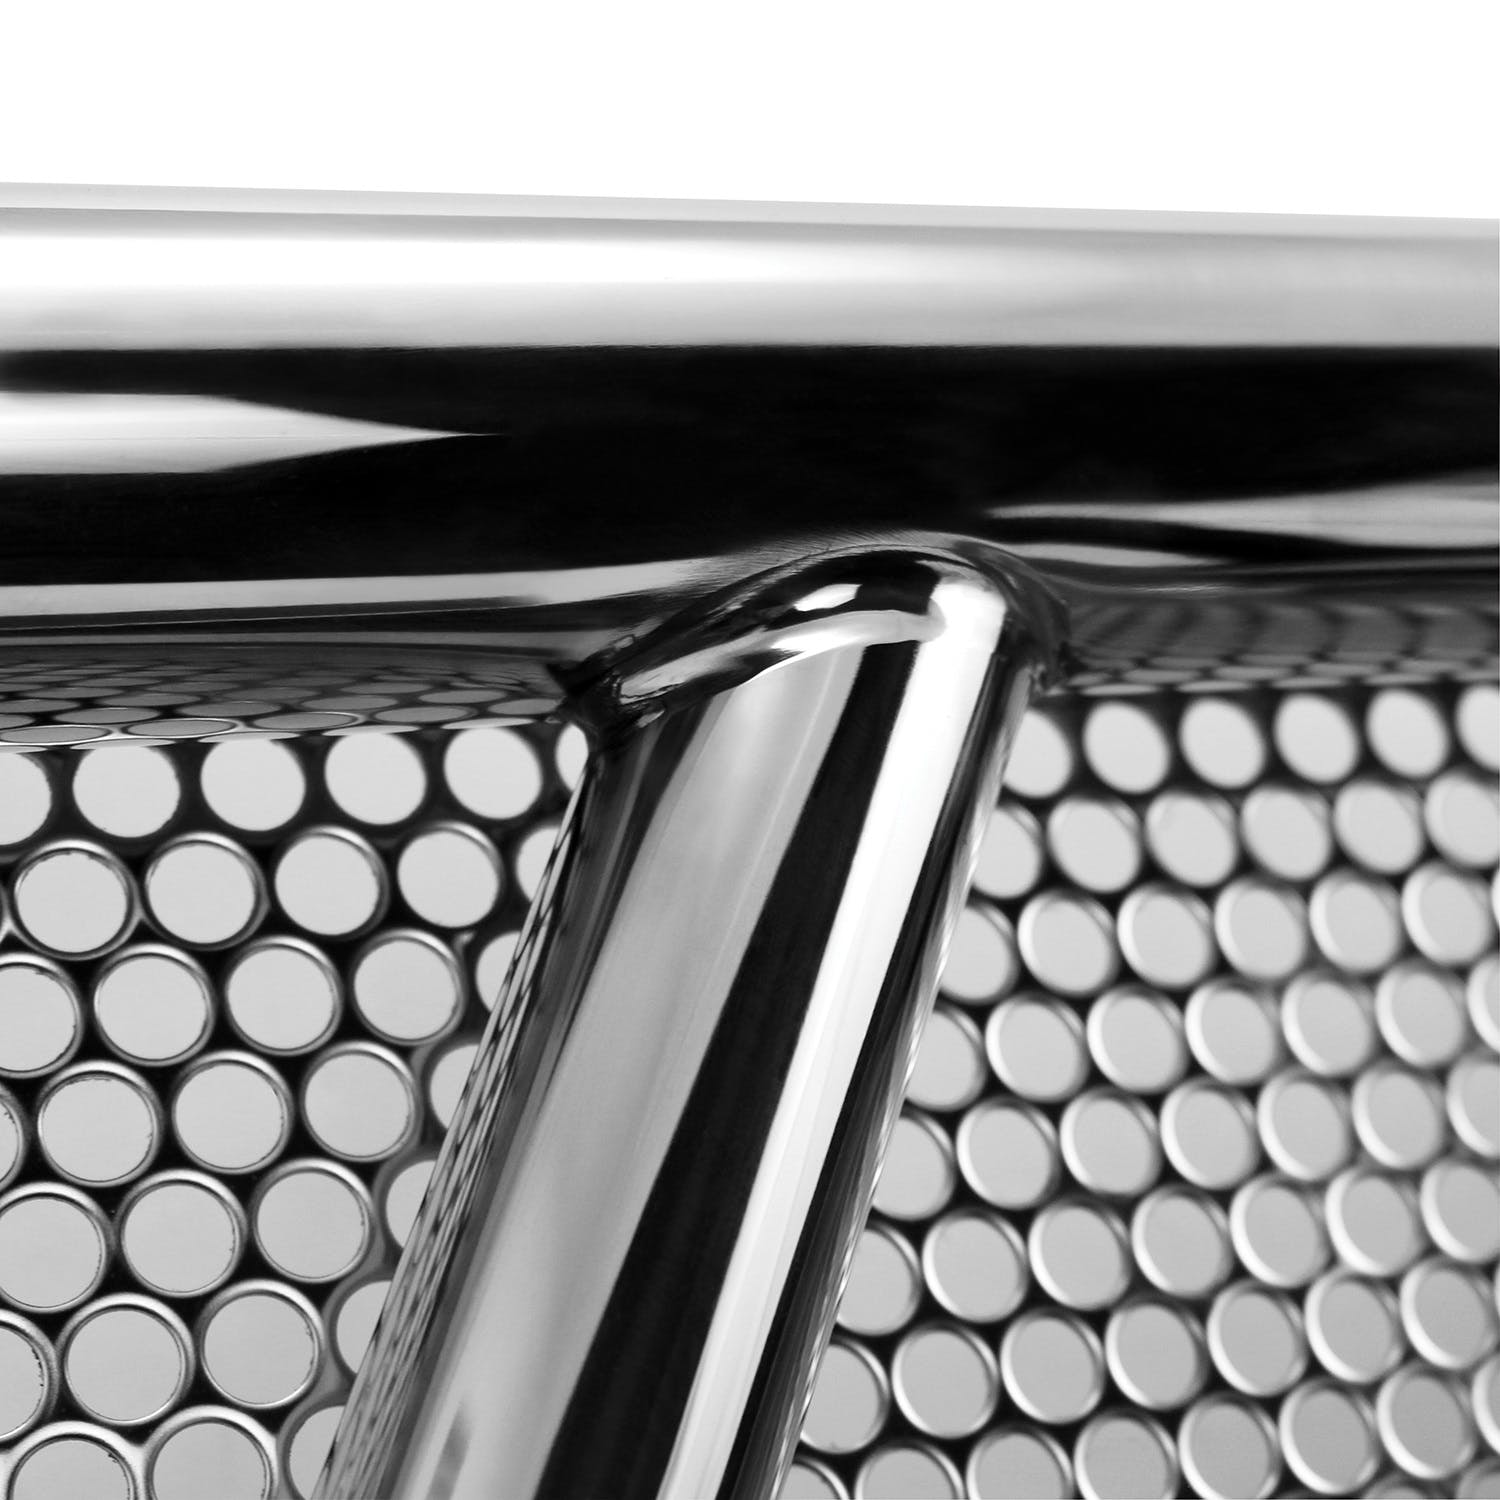 Westin Automotive 57-3700 HDX Grille Guard Stainless Steel